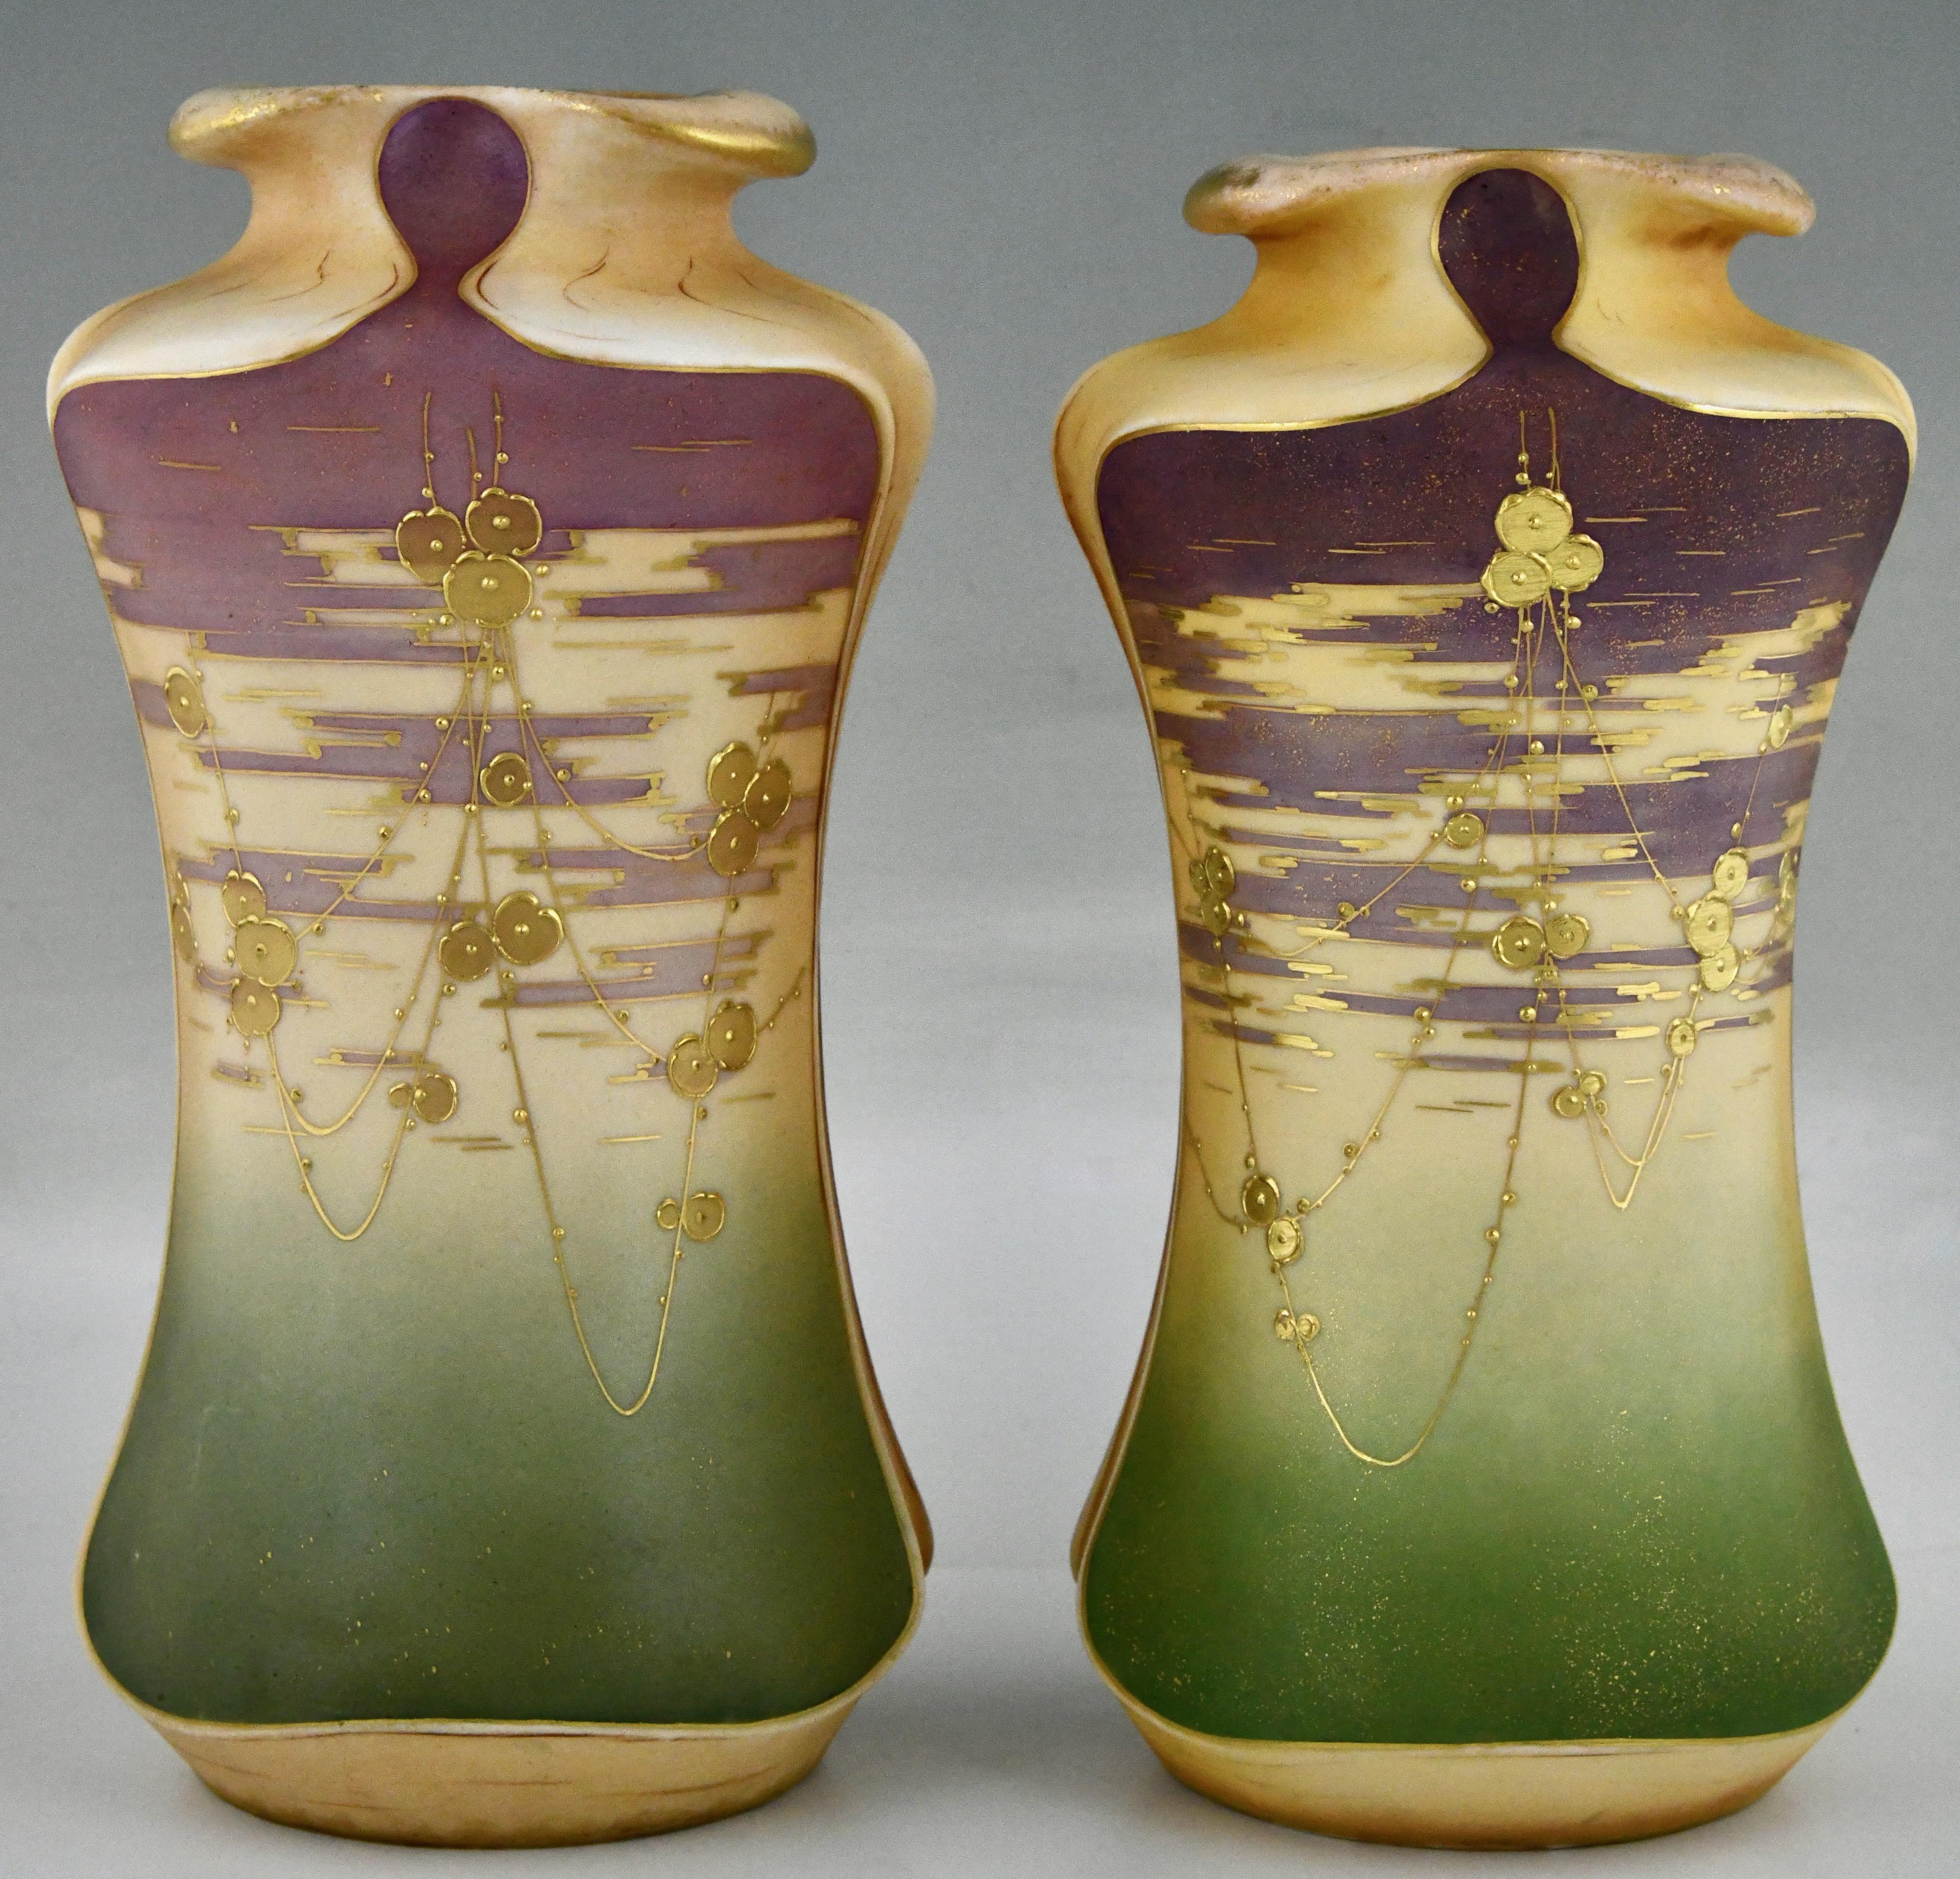 Art Nouveau ceramic vases with gilt flowers by Turn Teplitz marked RStK and Amphora. 
Ceramic, hand-painted green and purple with gilt flowers. 
Austria ca. 1900